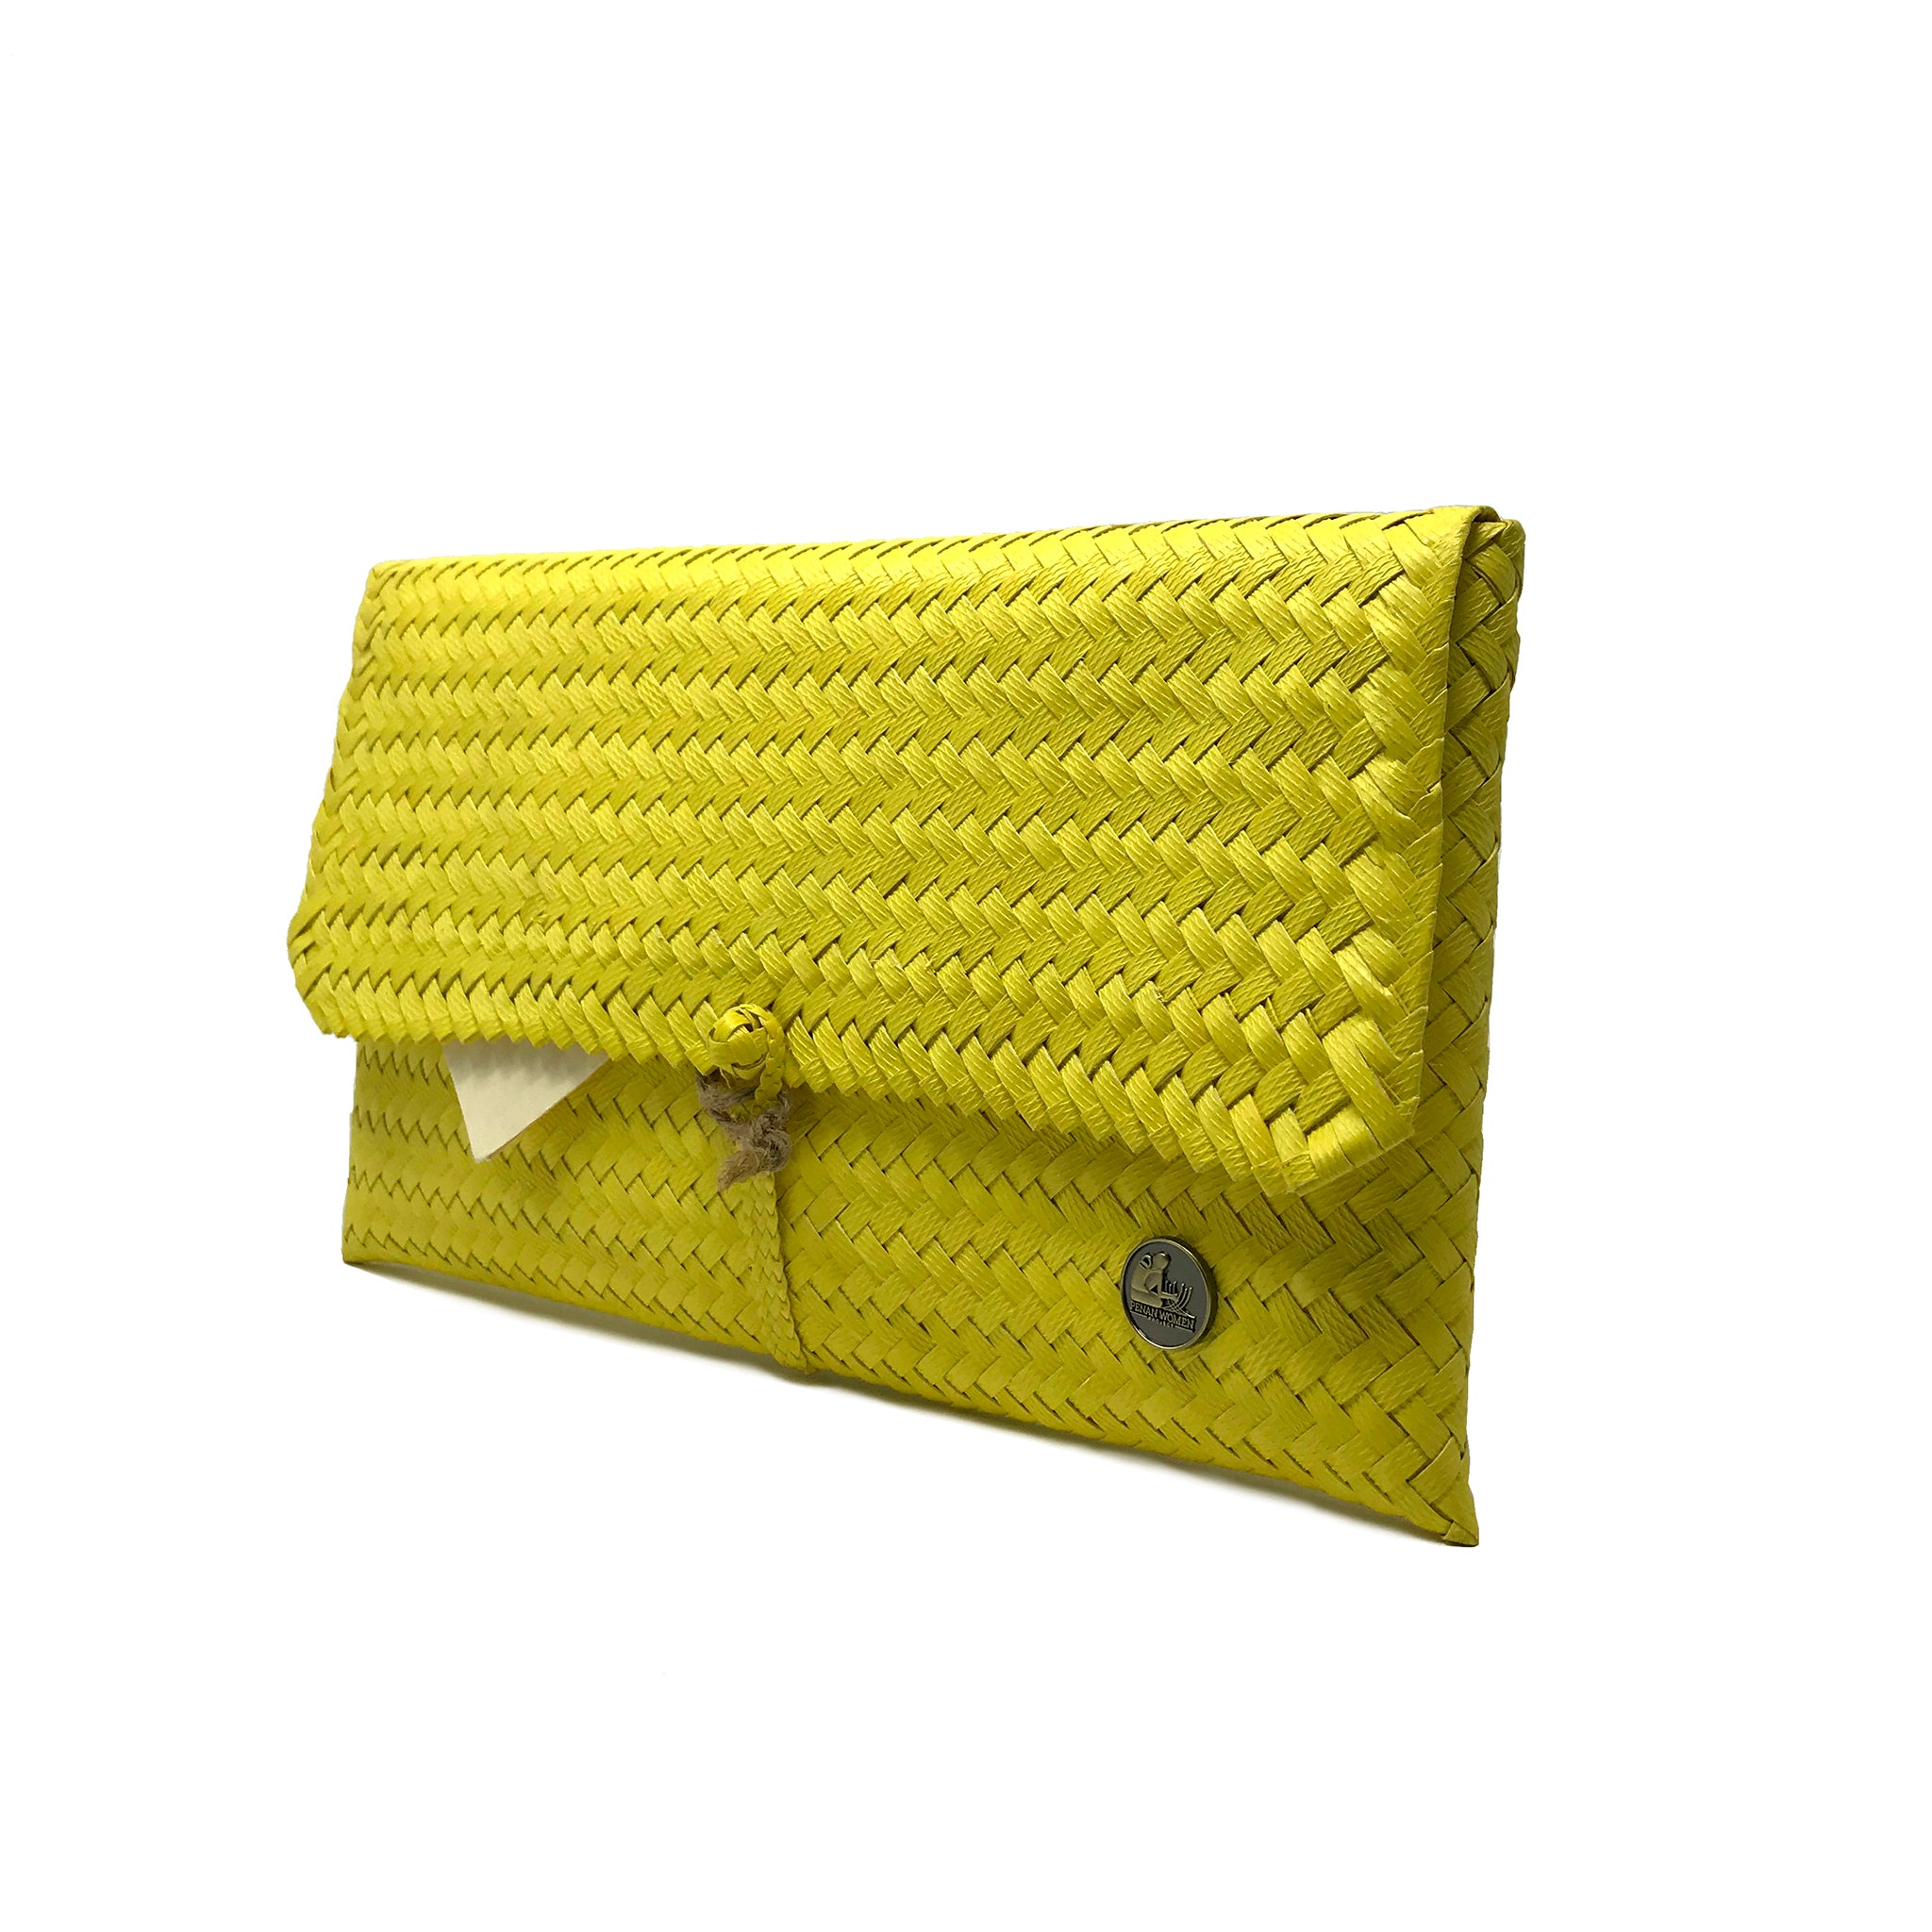 Yellow clutch at a 45-degree angle.